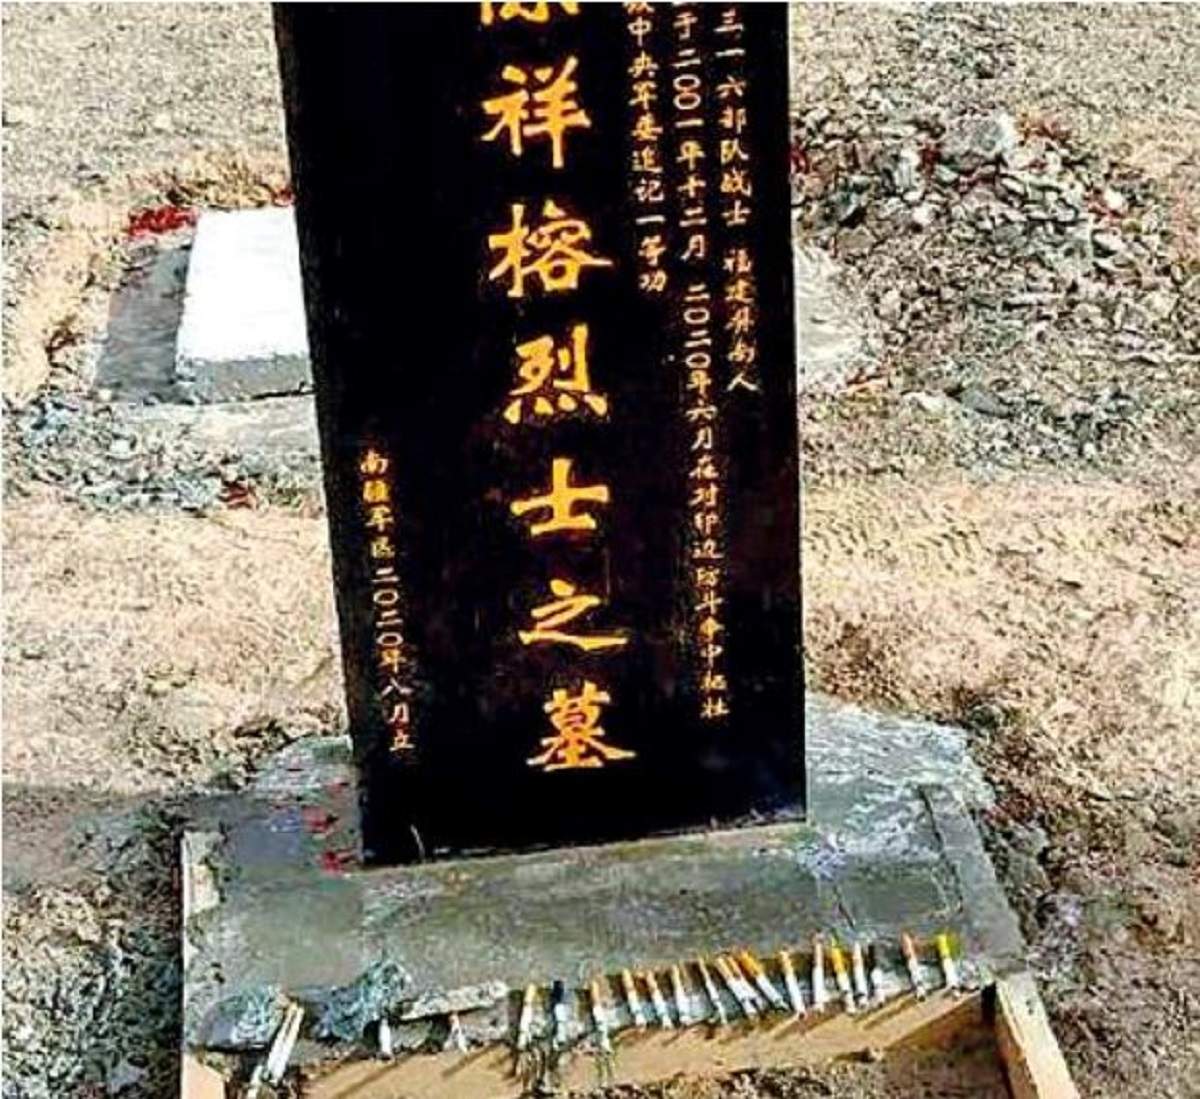 Viral pic of Chinese soldier's grave provides first evidence of PLA casualty in Galwan Valley clash